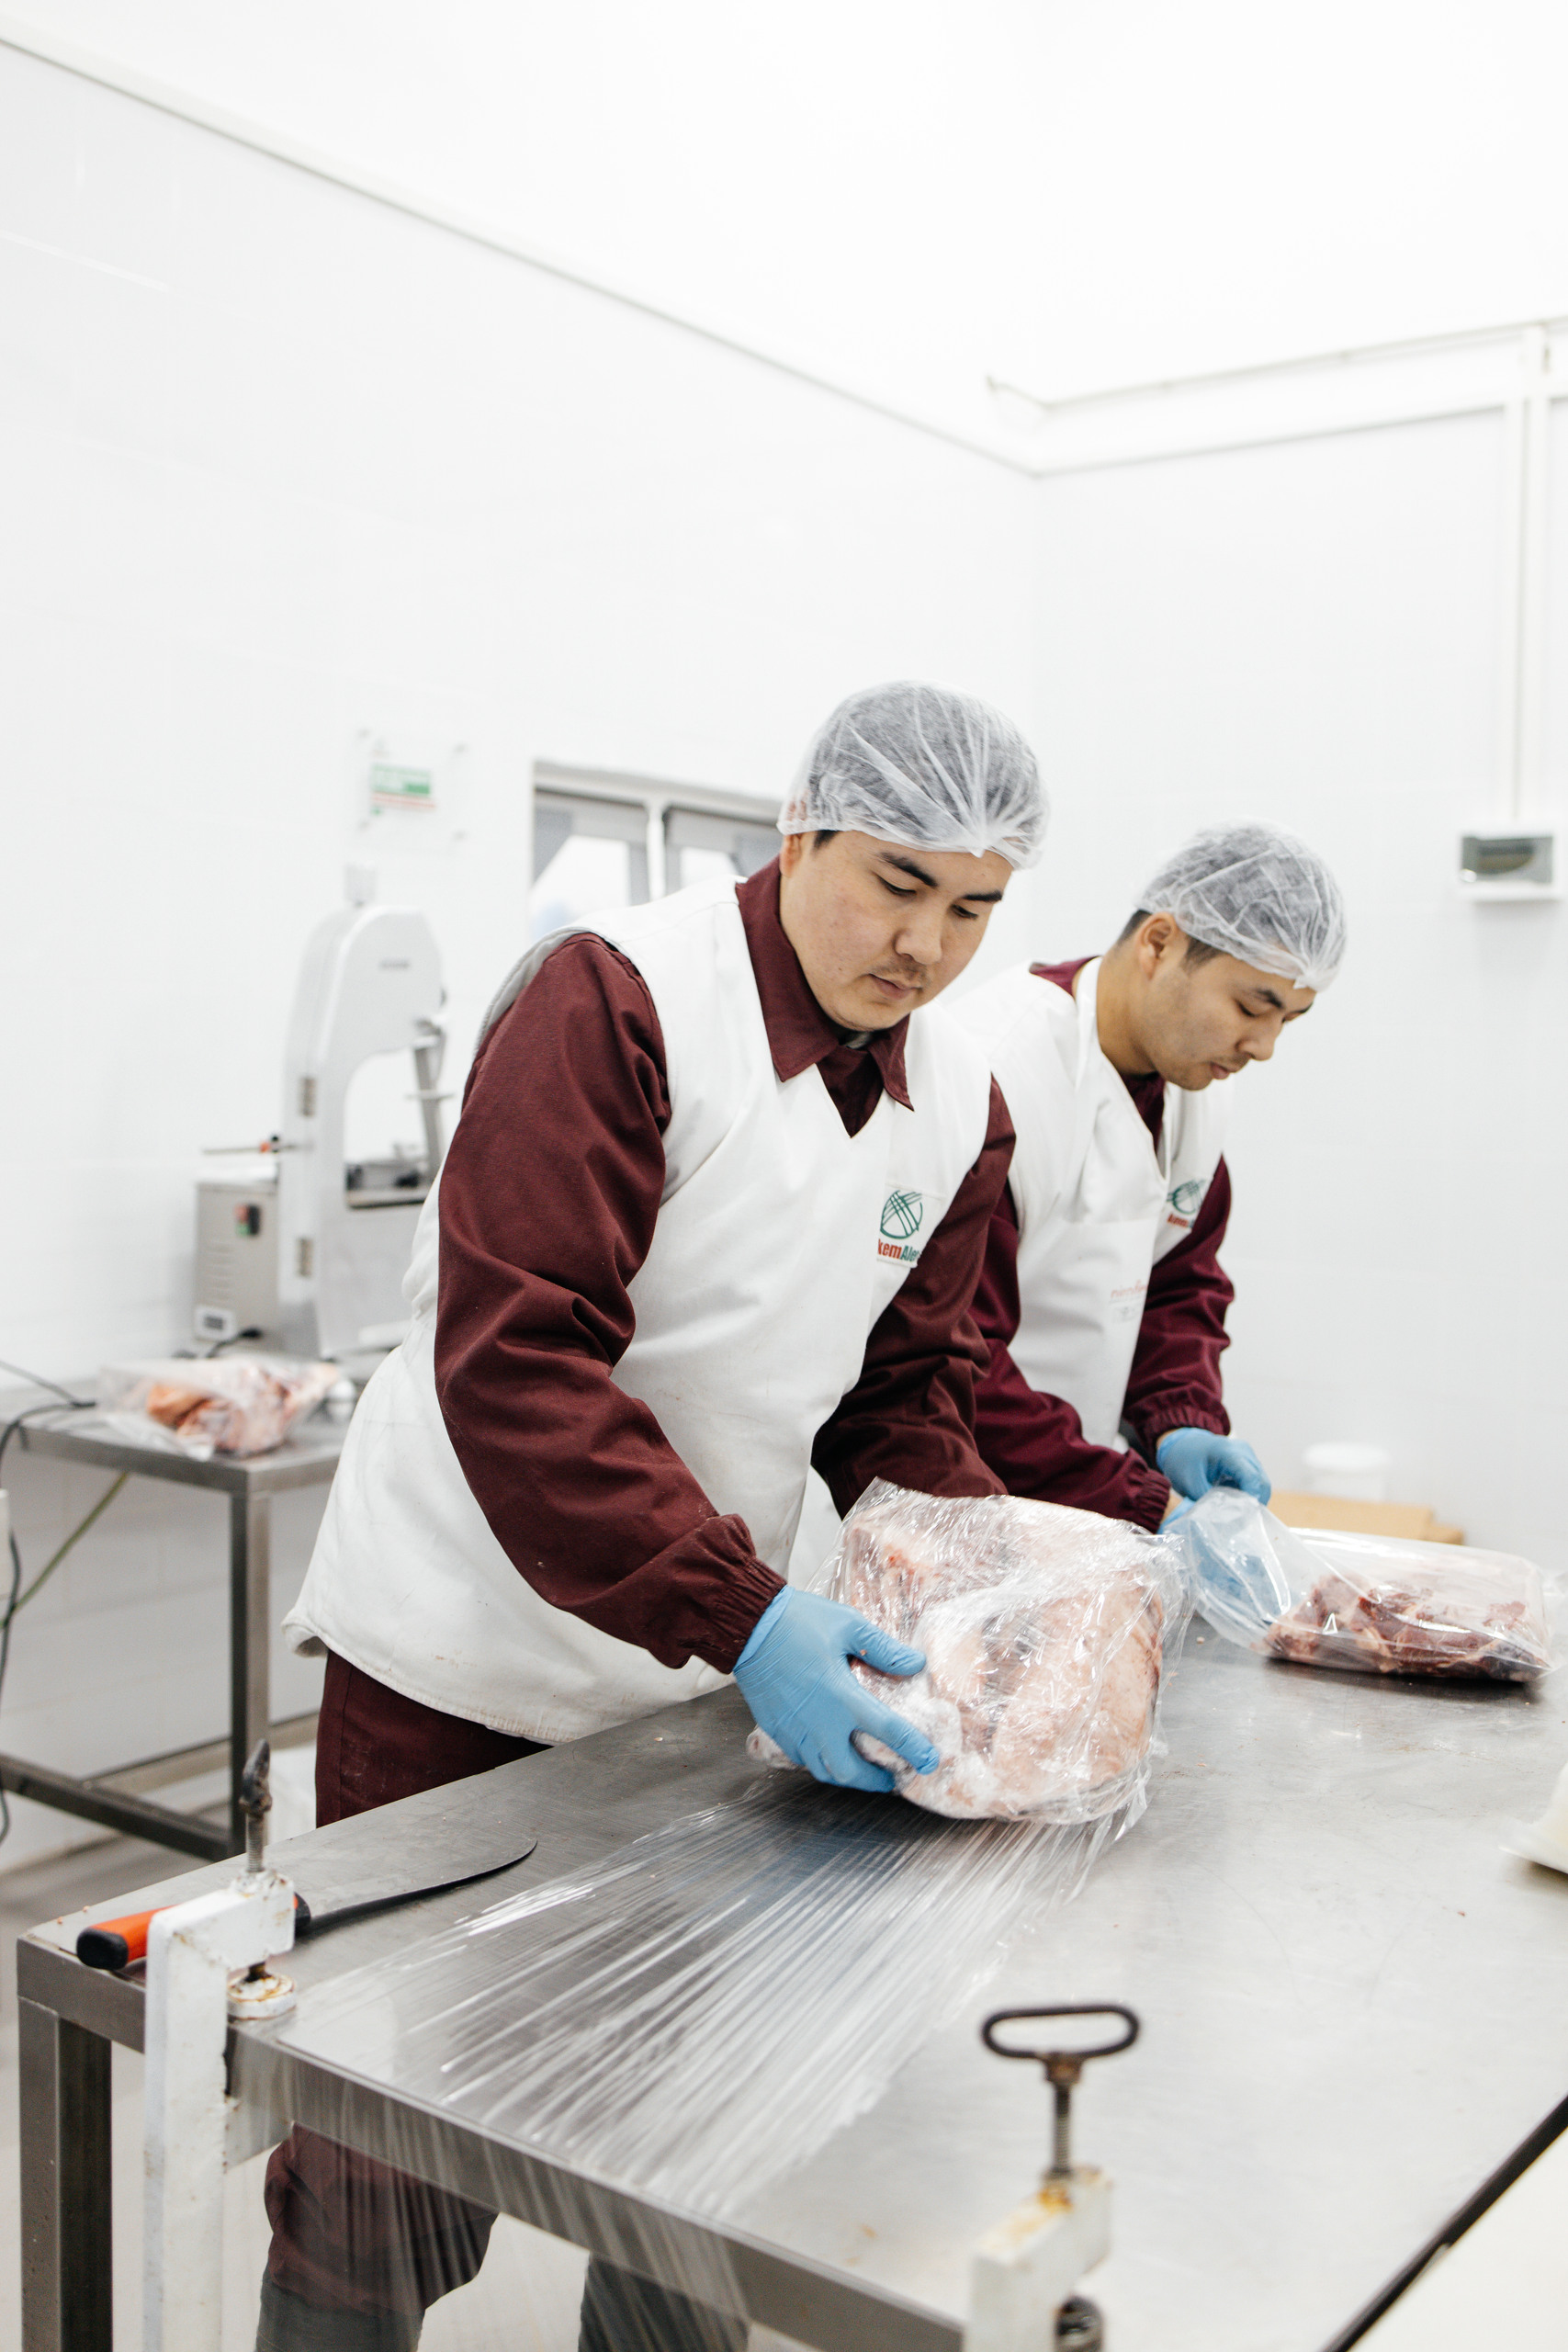 The first meat processing plant is launched in the Mangistau region